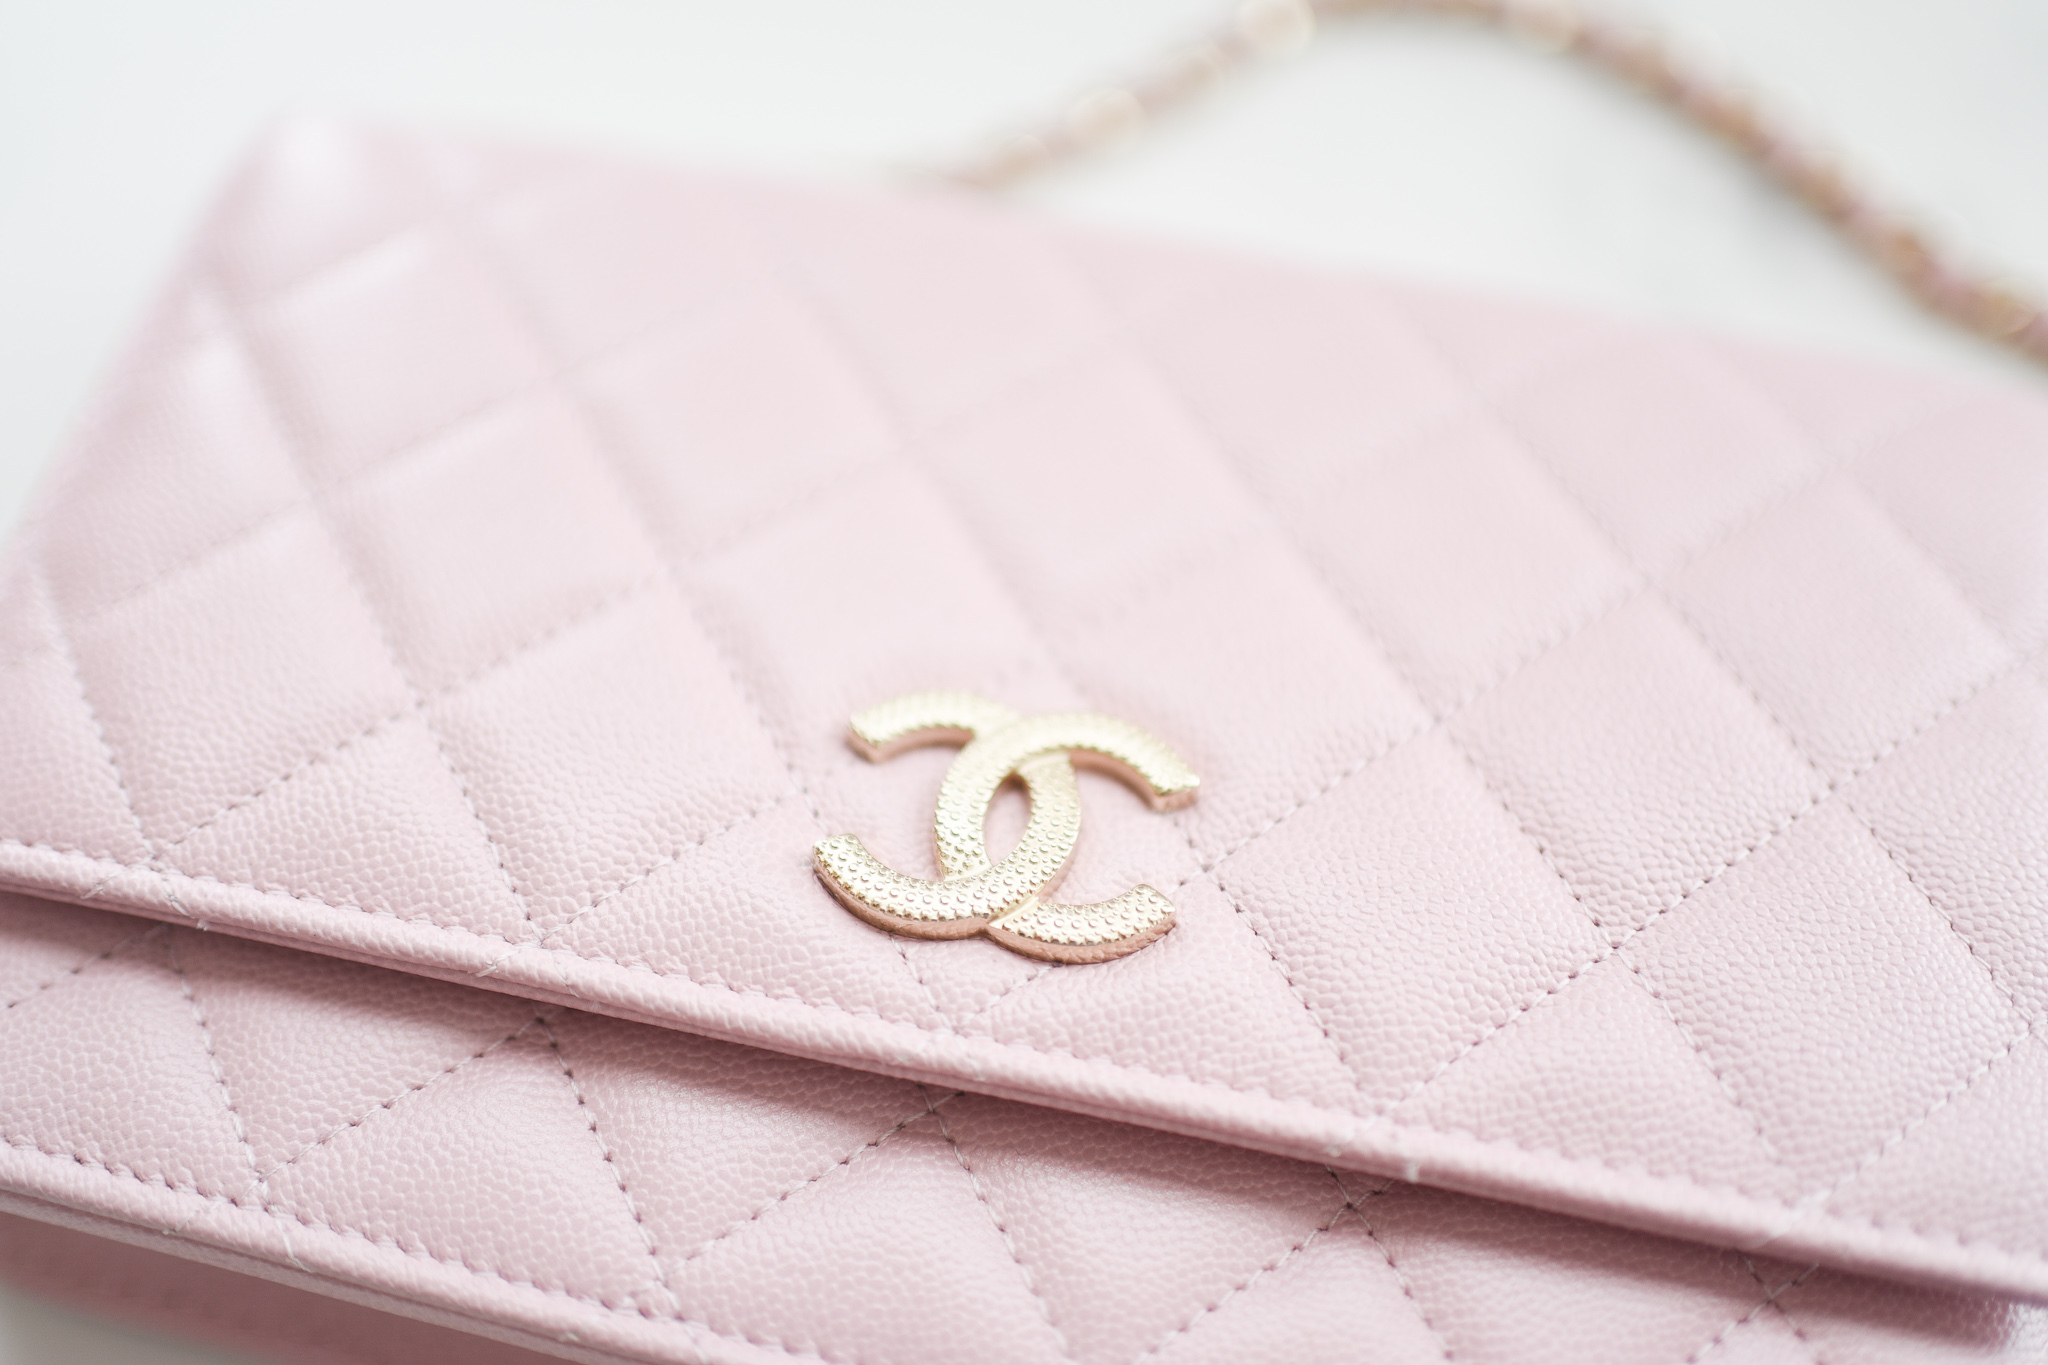 Chanel Wallet on Chain, Lilac Pink Caviar Leather, Gold Hardware, New in  Box GA001